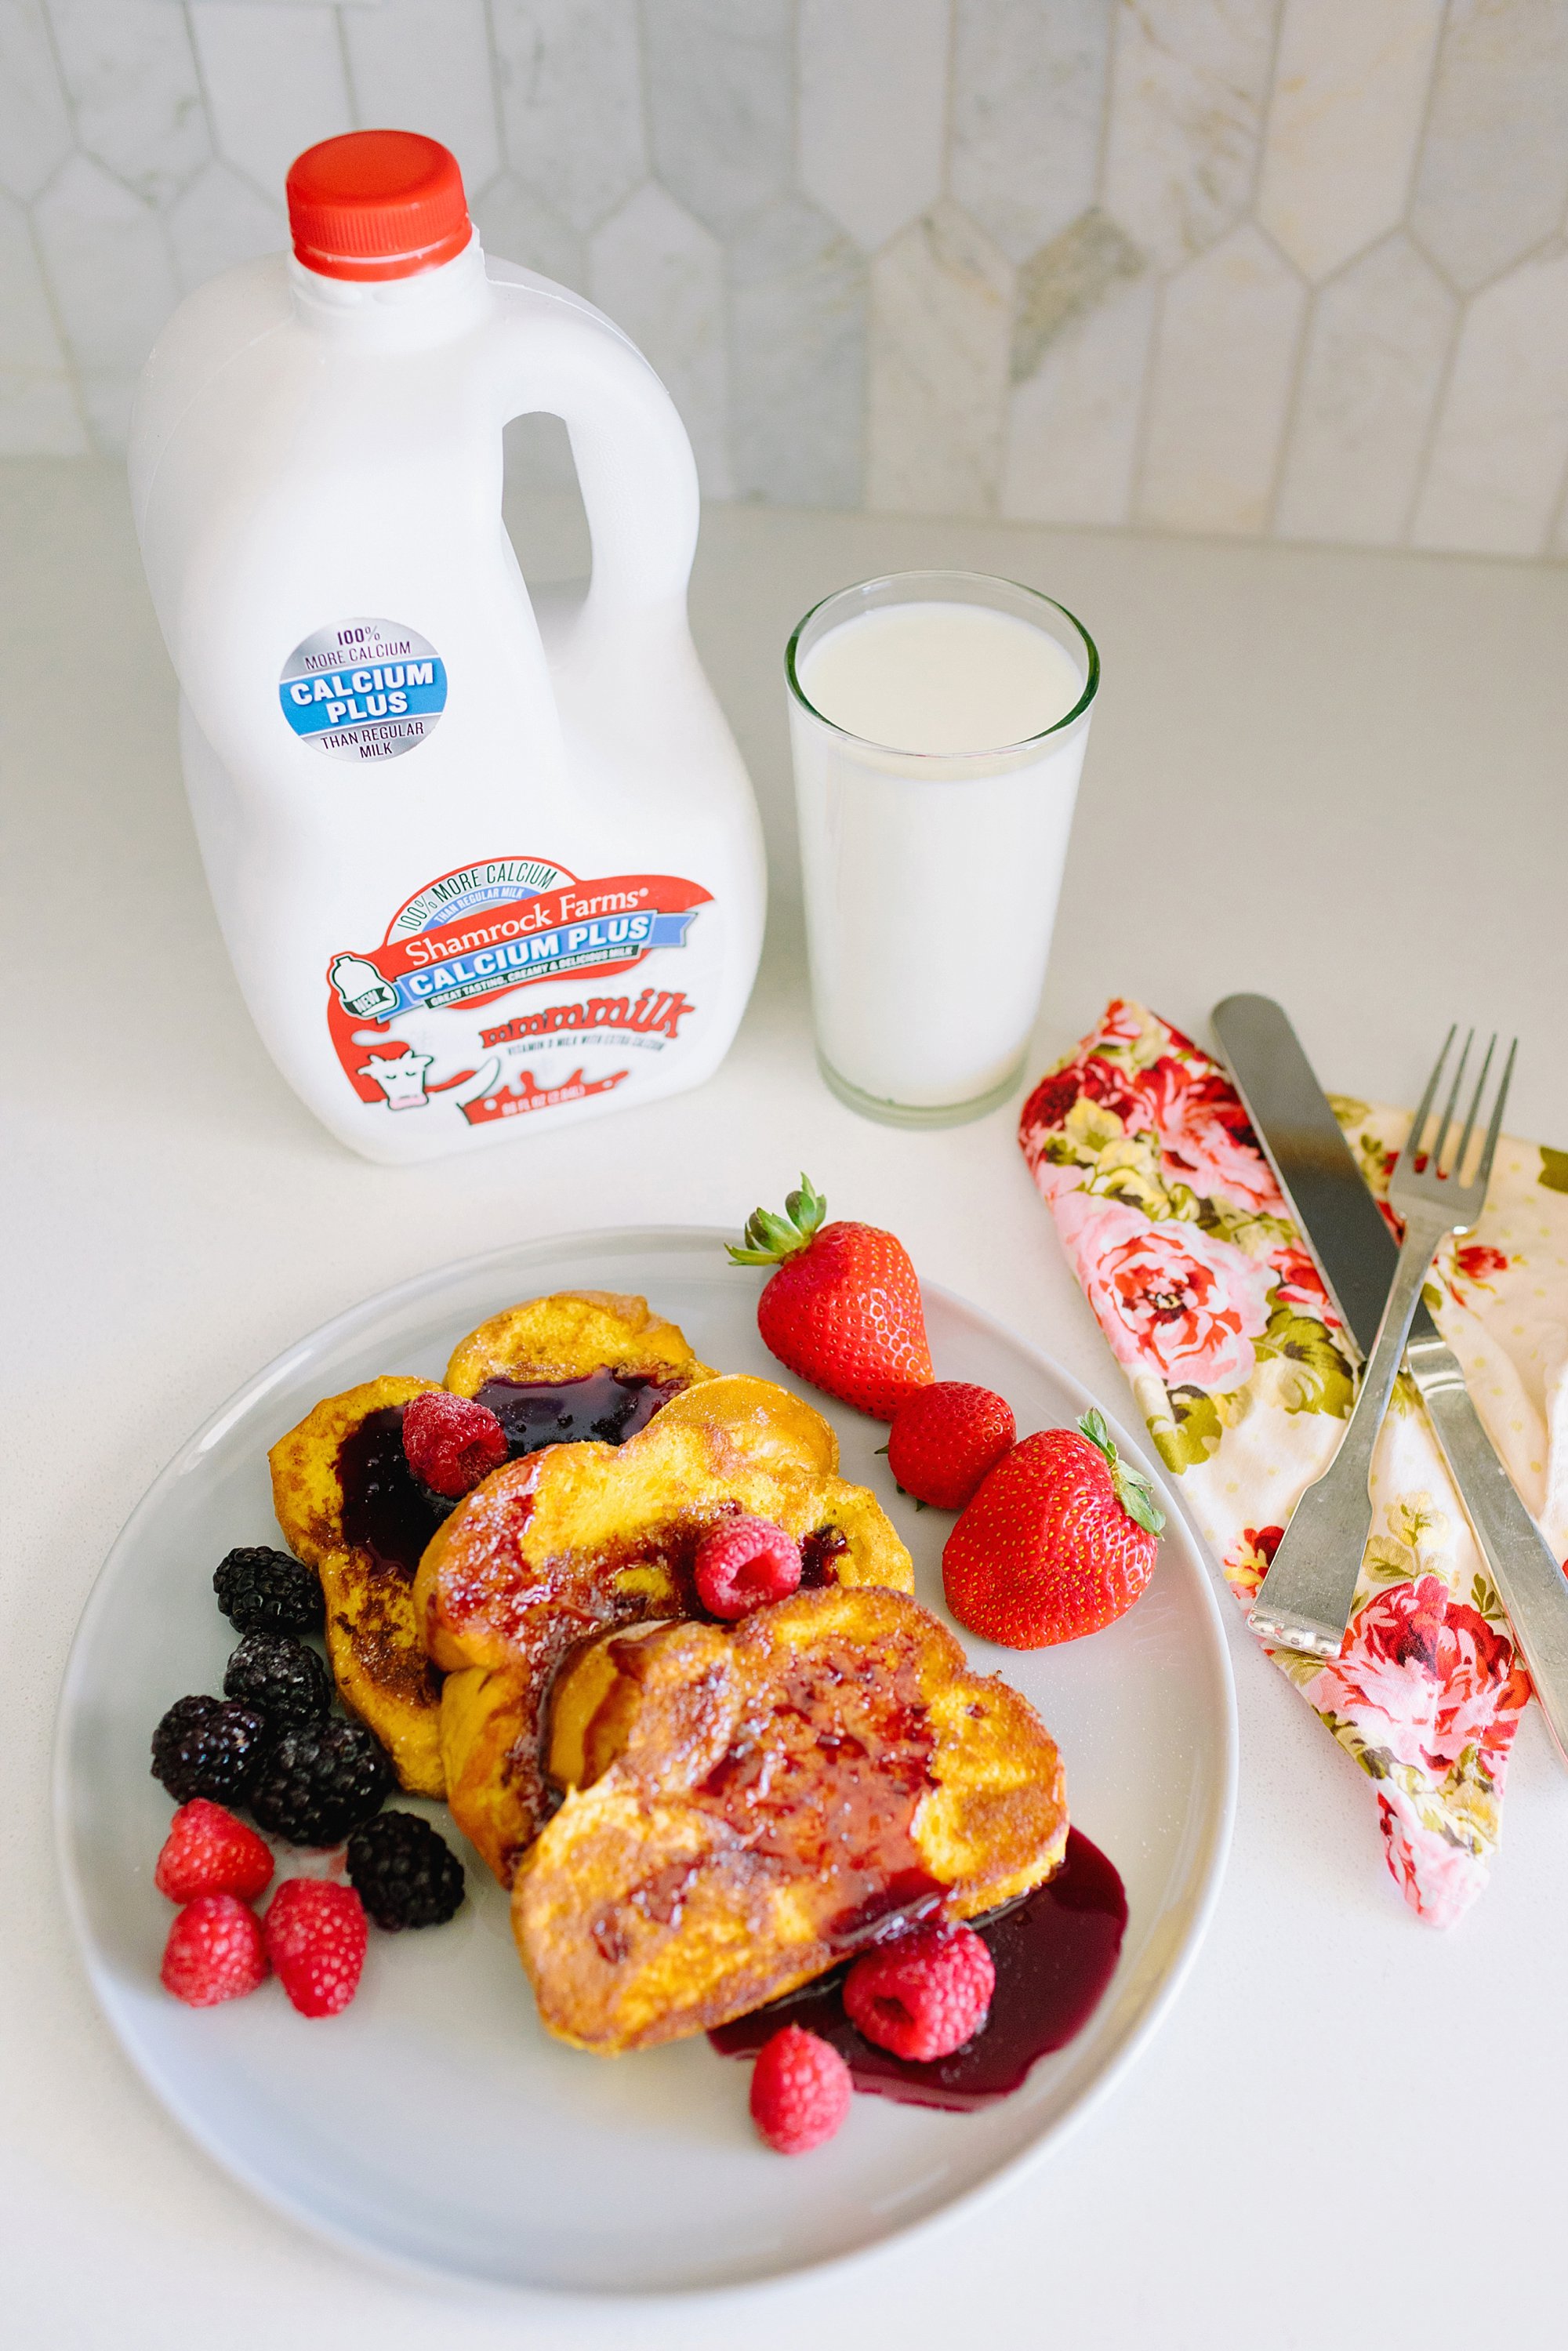 French Toast recipe easy to make, check out the instructions in this blog post! #frenchtoast #foodphotography